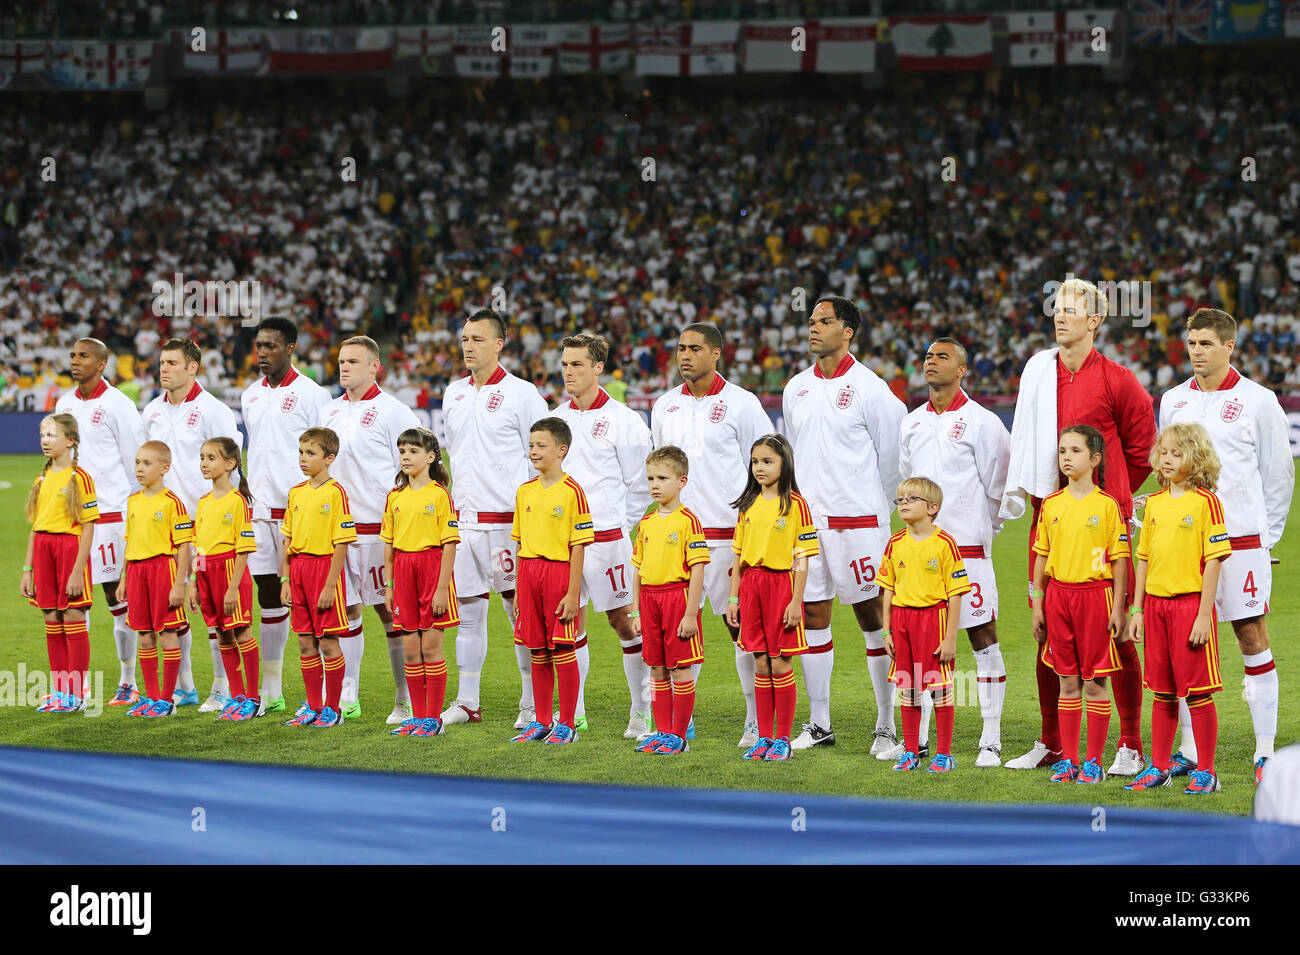 KYIV, UKRAINE - JUNE 24, 2012: Players of England football team sing the national anthen before UEFA EURO 2012 Quarter-final game against Italy at Olympic stadium in Kyiv, Ukraine Stock Photo